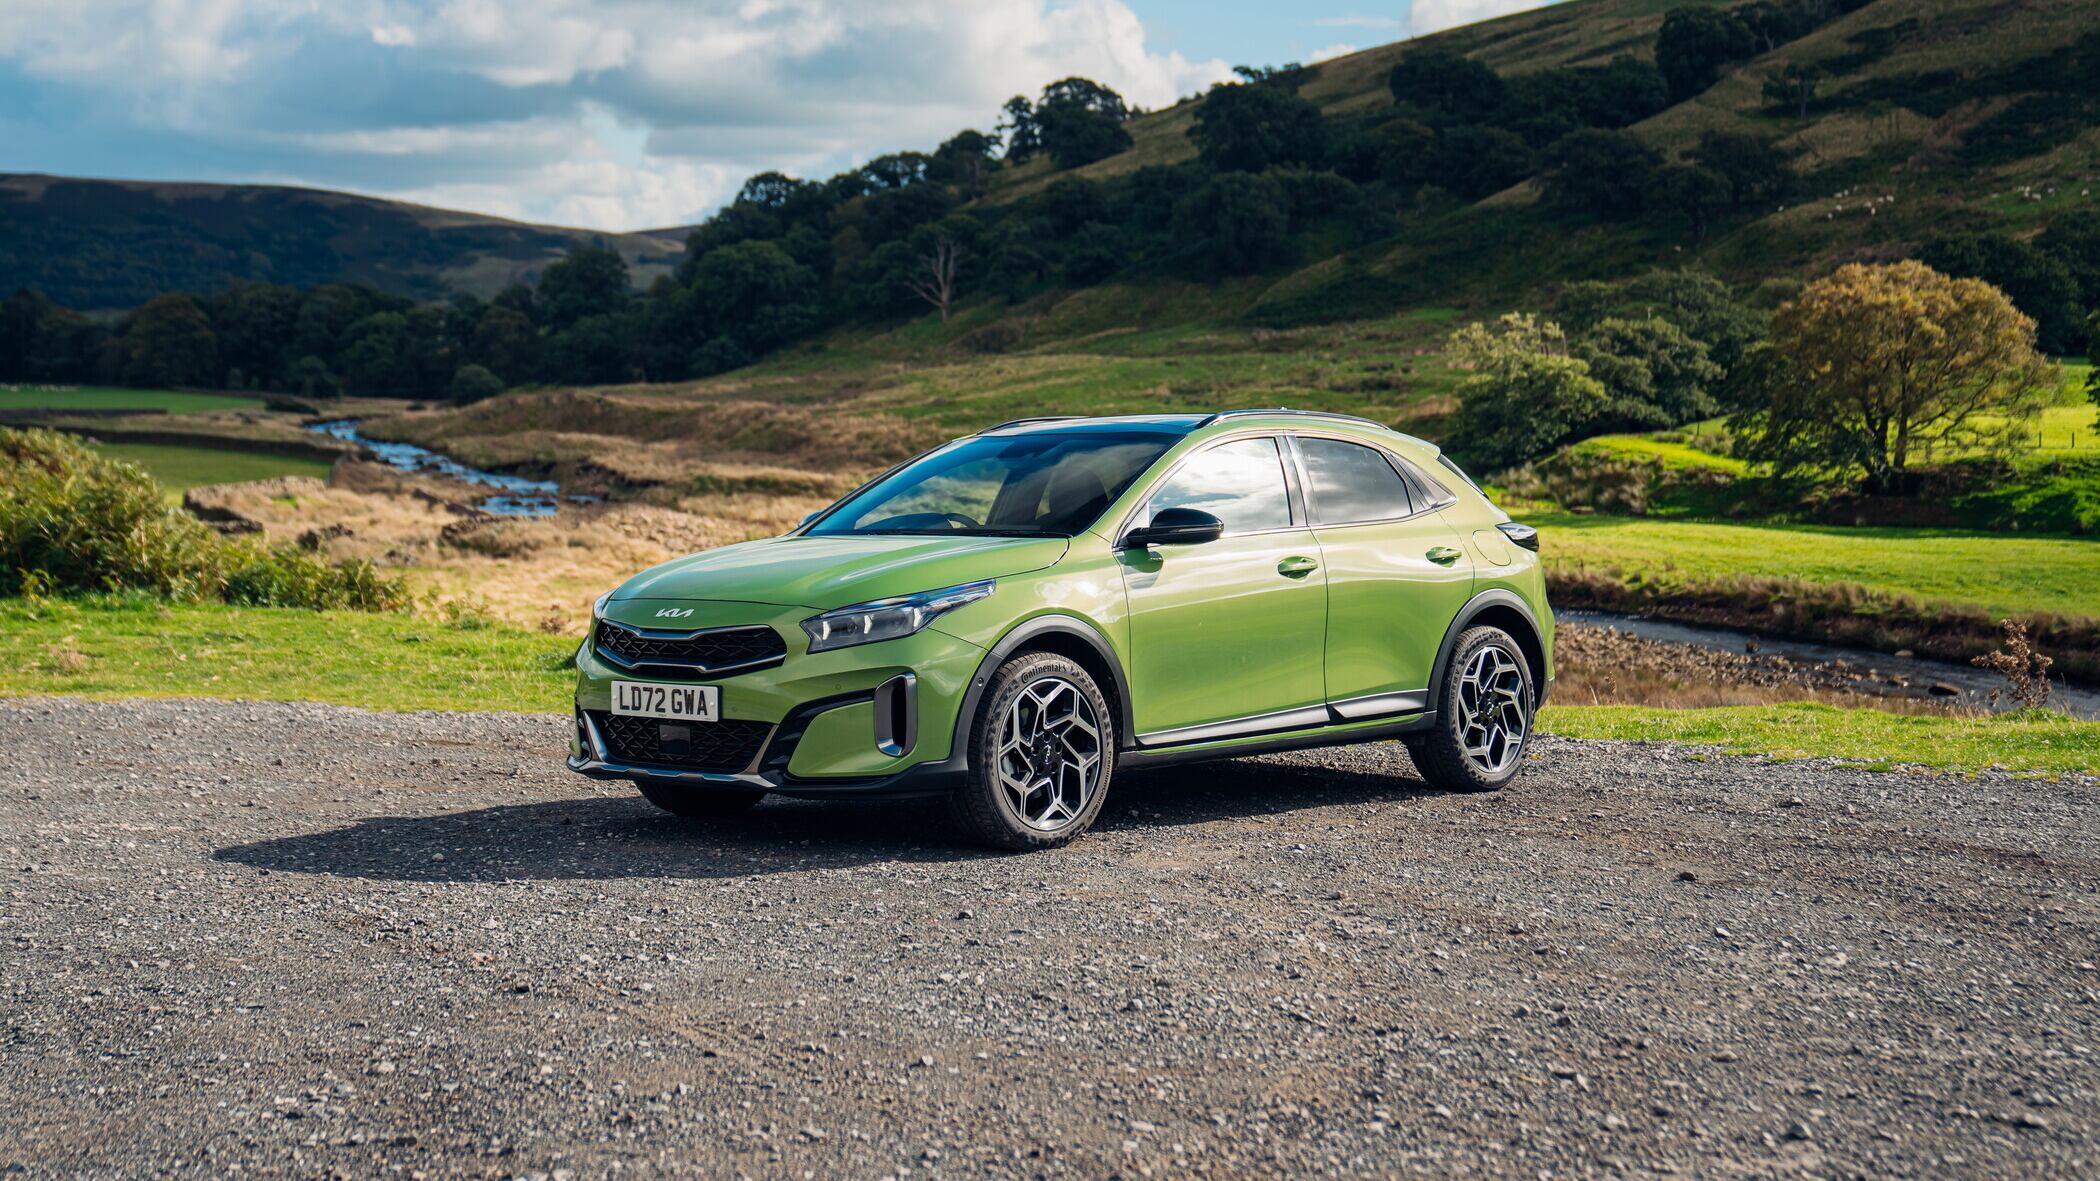 With the XCeed, Kia has hit on a winning formula with its customers